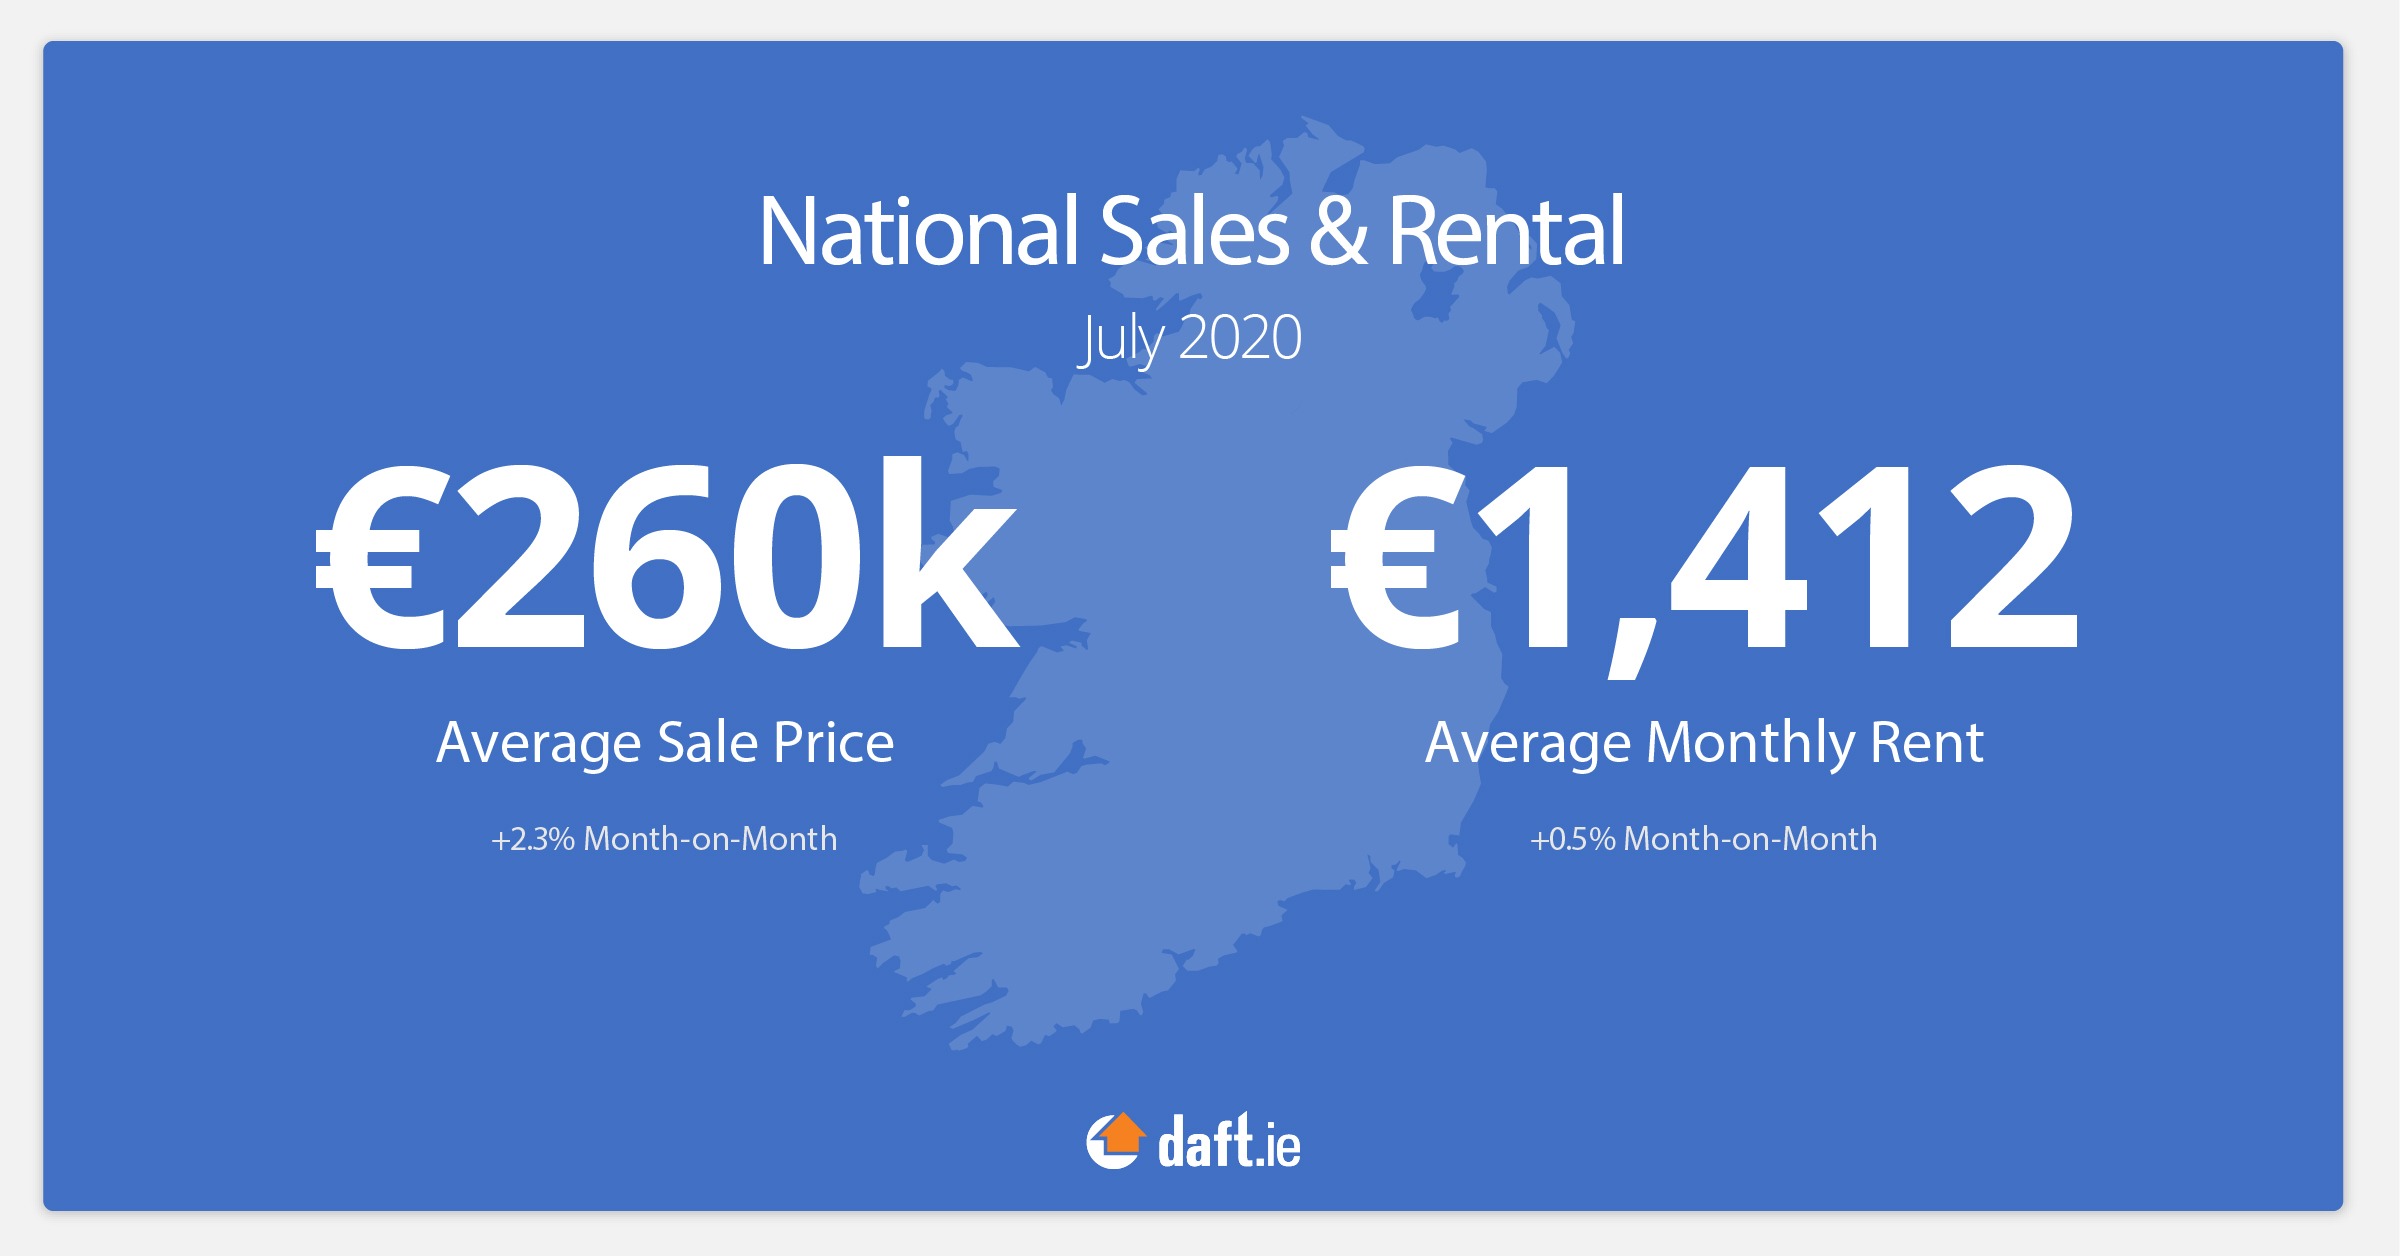 National sales and rental average prices